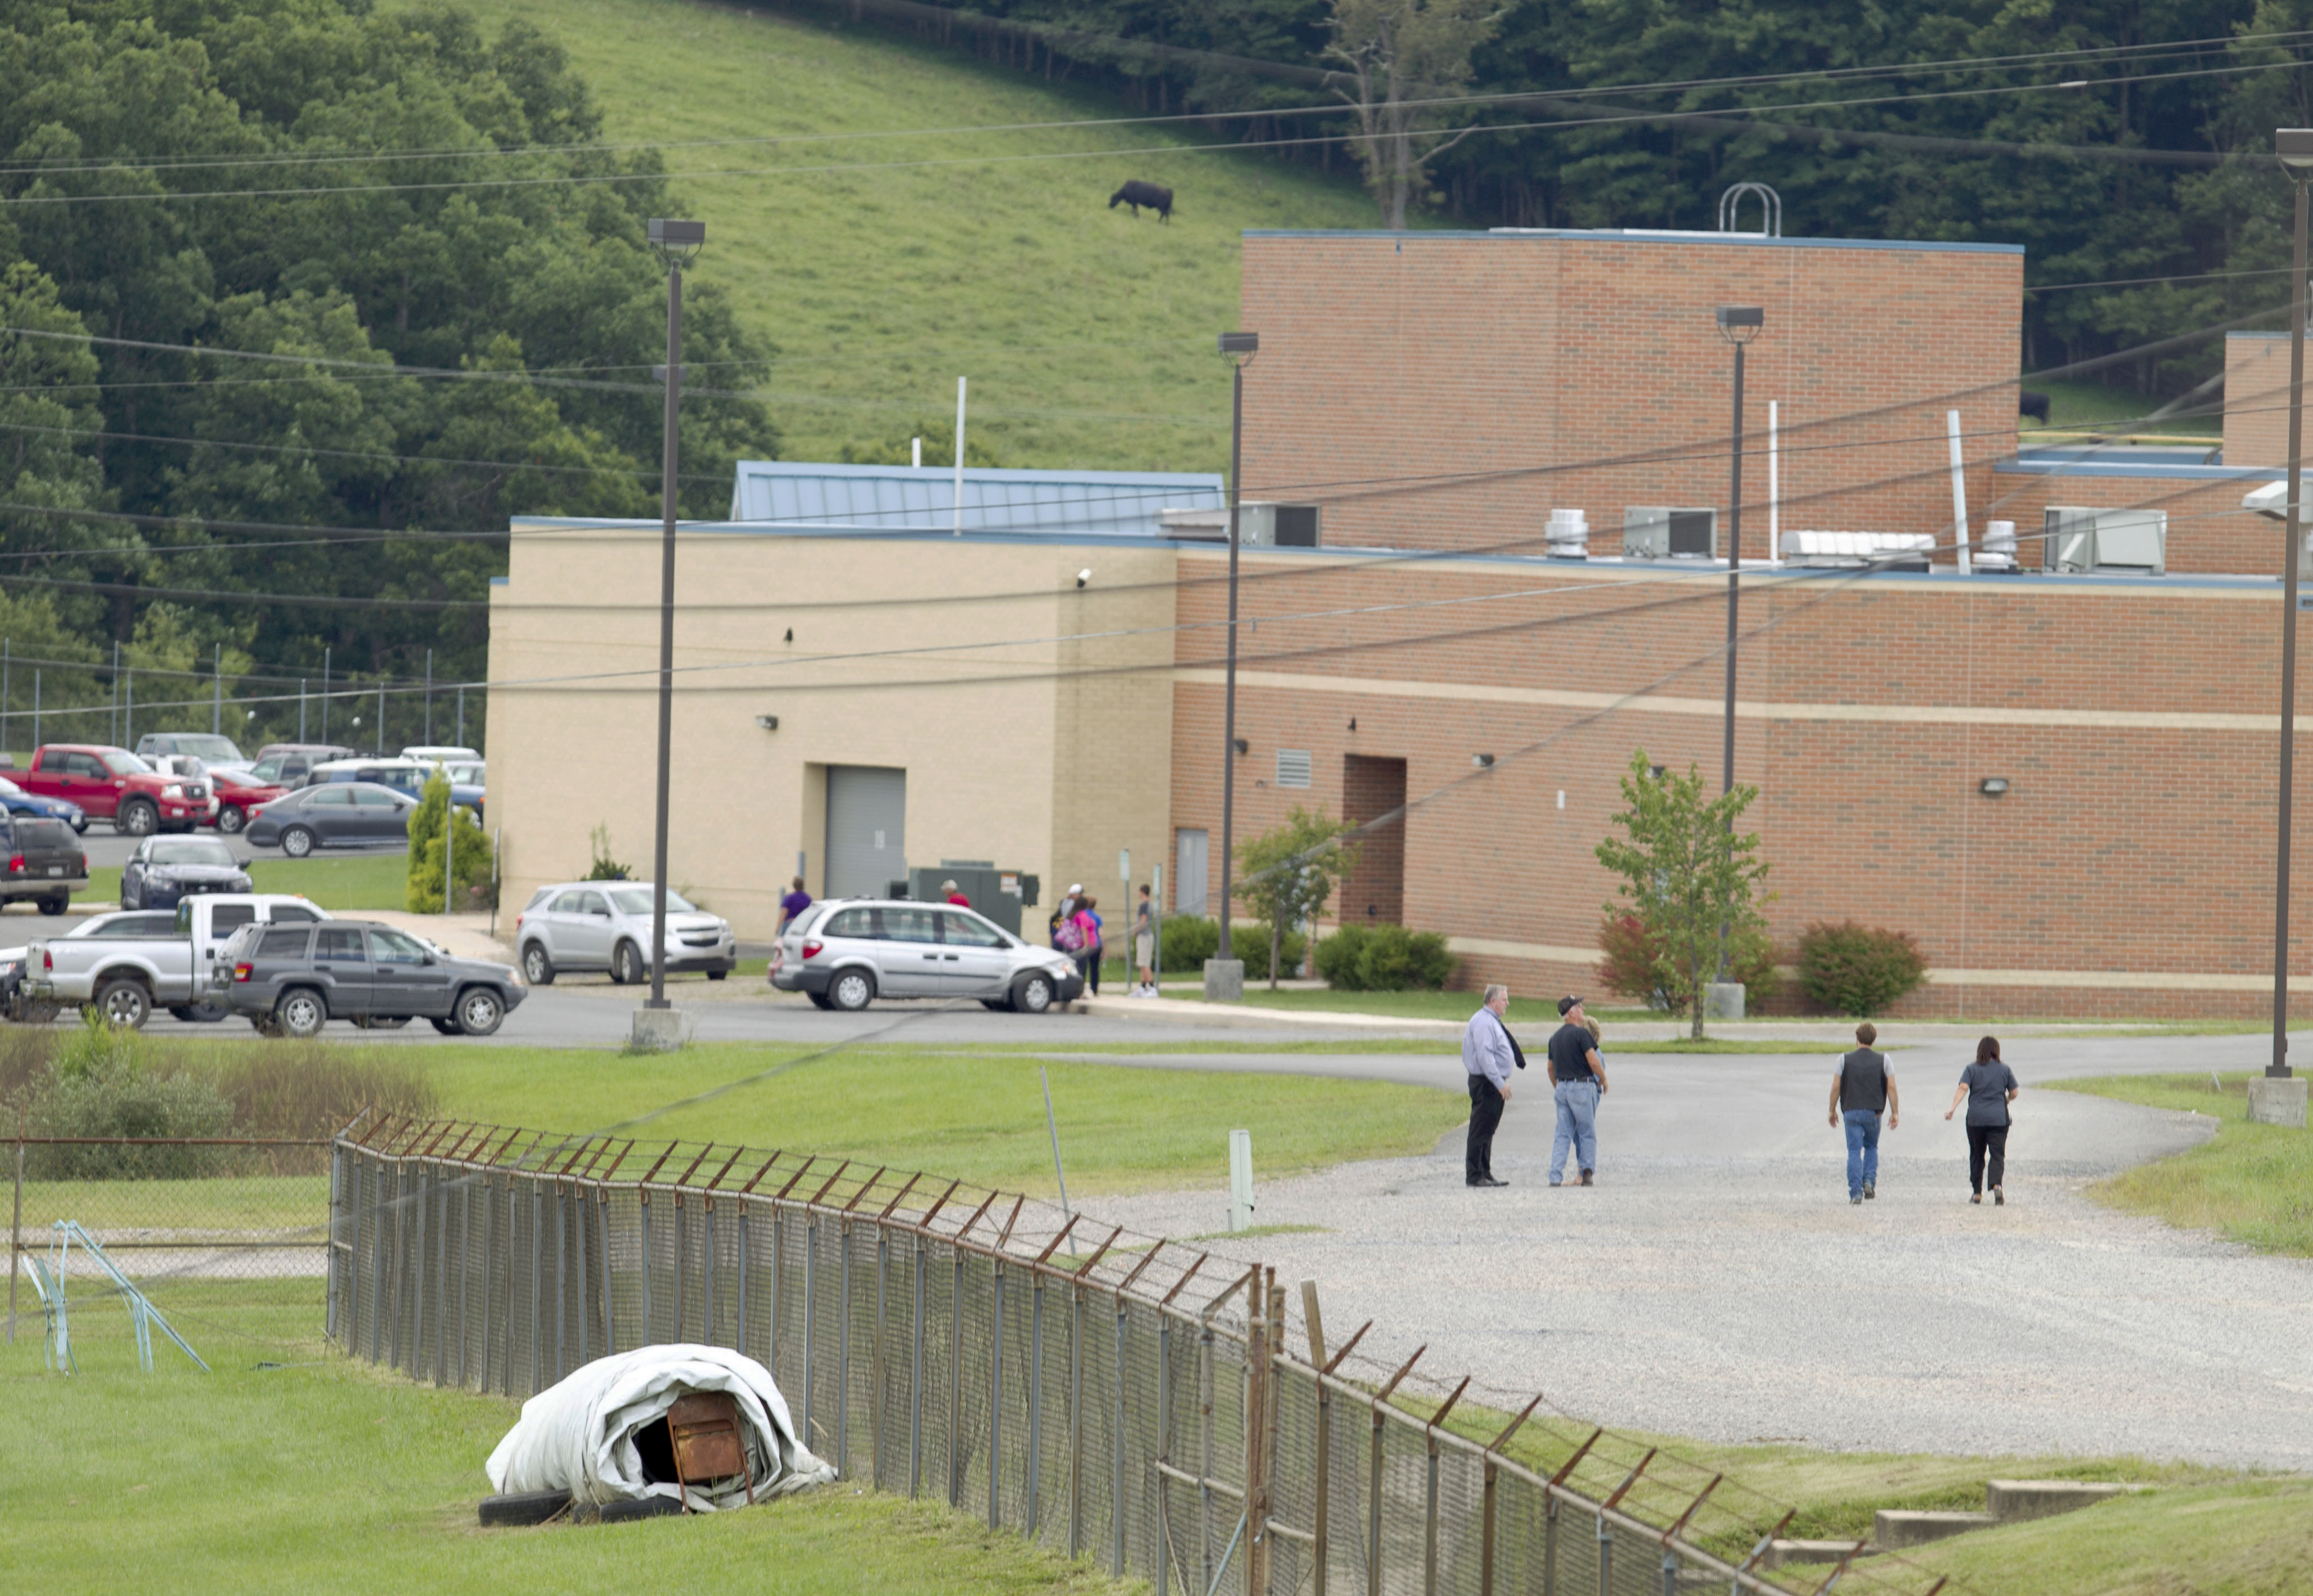 Parents of children from Philip Barbour High School in Philippi, W.Va., walk to the school to meet up with their children that were evacuated after a "hostage-like" situation occurred in the school on Aug. 25, 2015. (Ben Queen&mdash;AP)